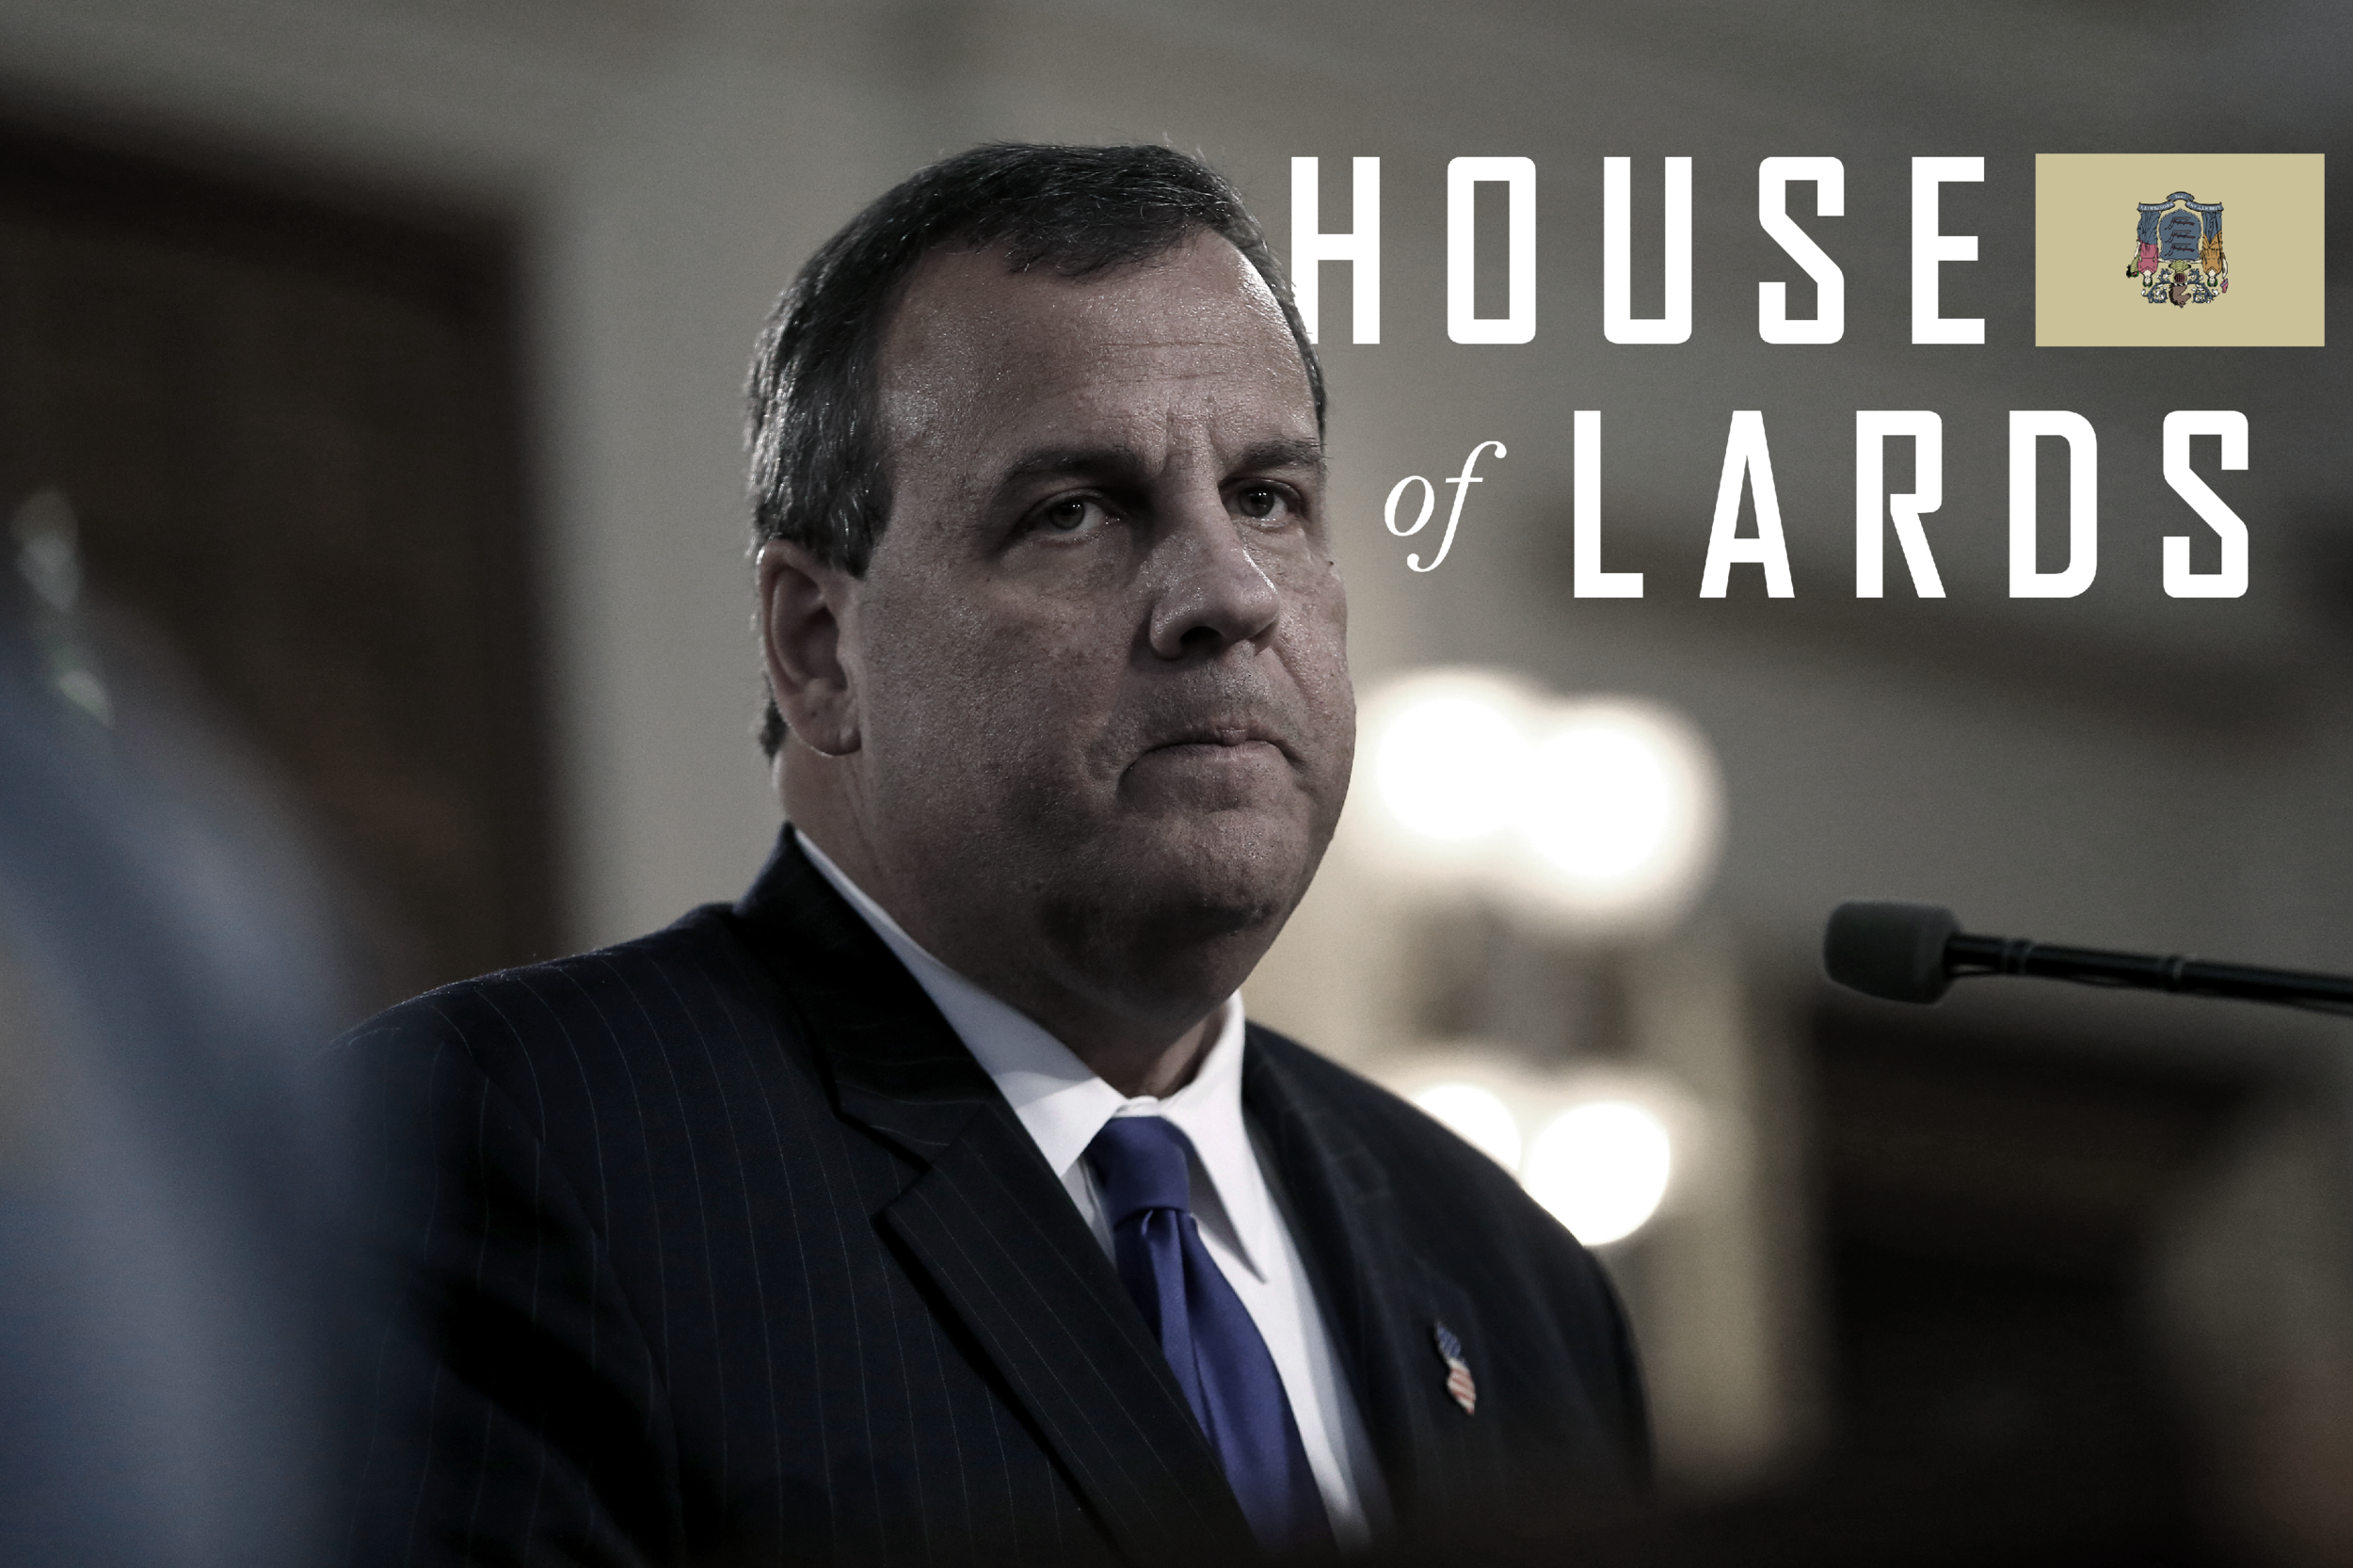 HOUSE OF LARDS  &nbsp;| We recommend binge-watching the show.